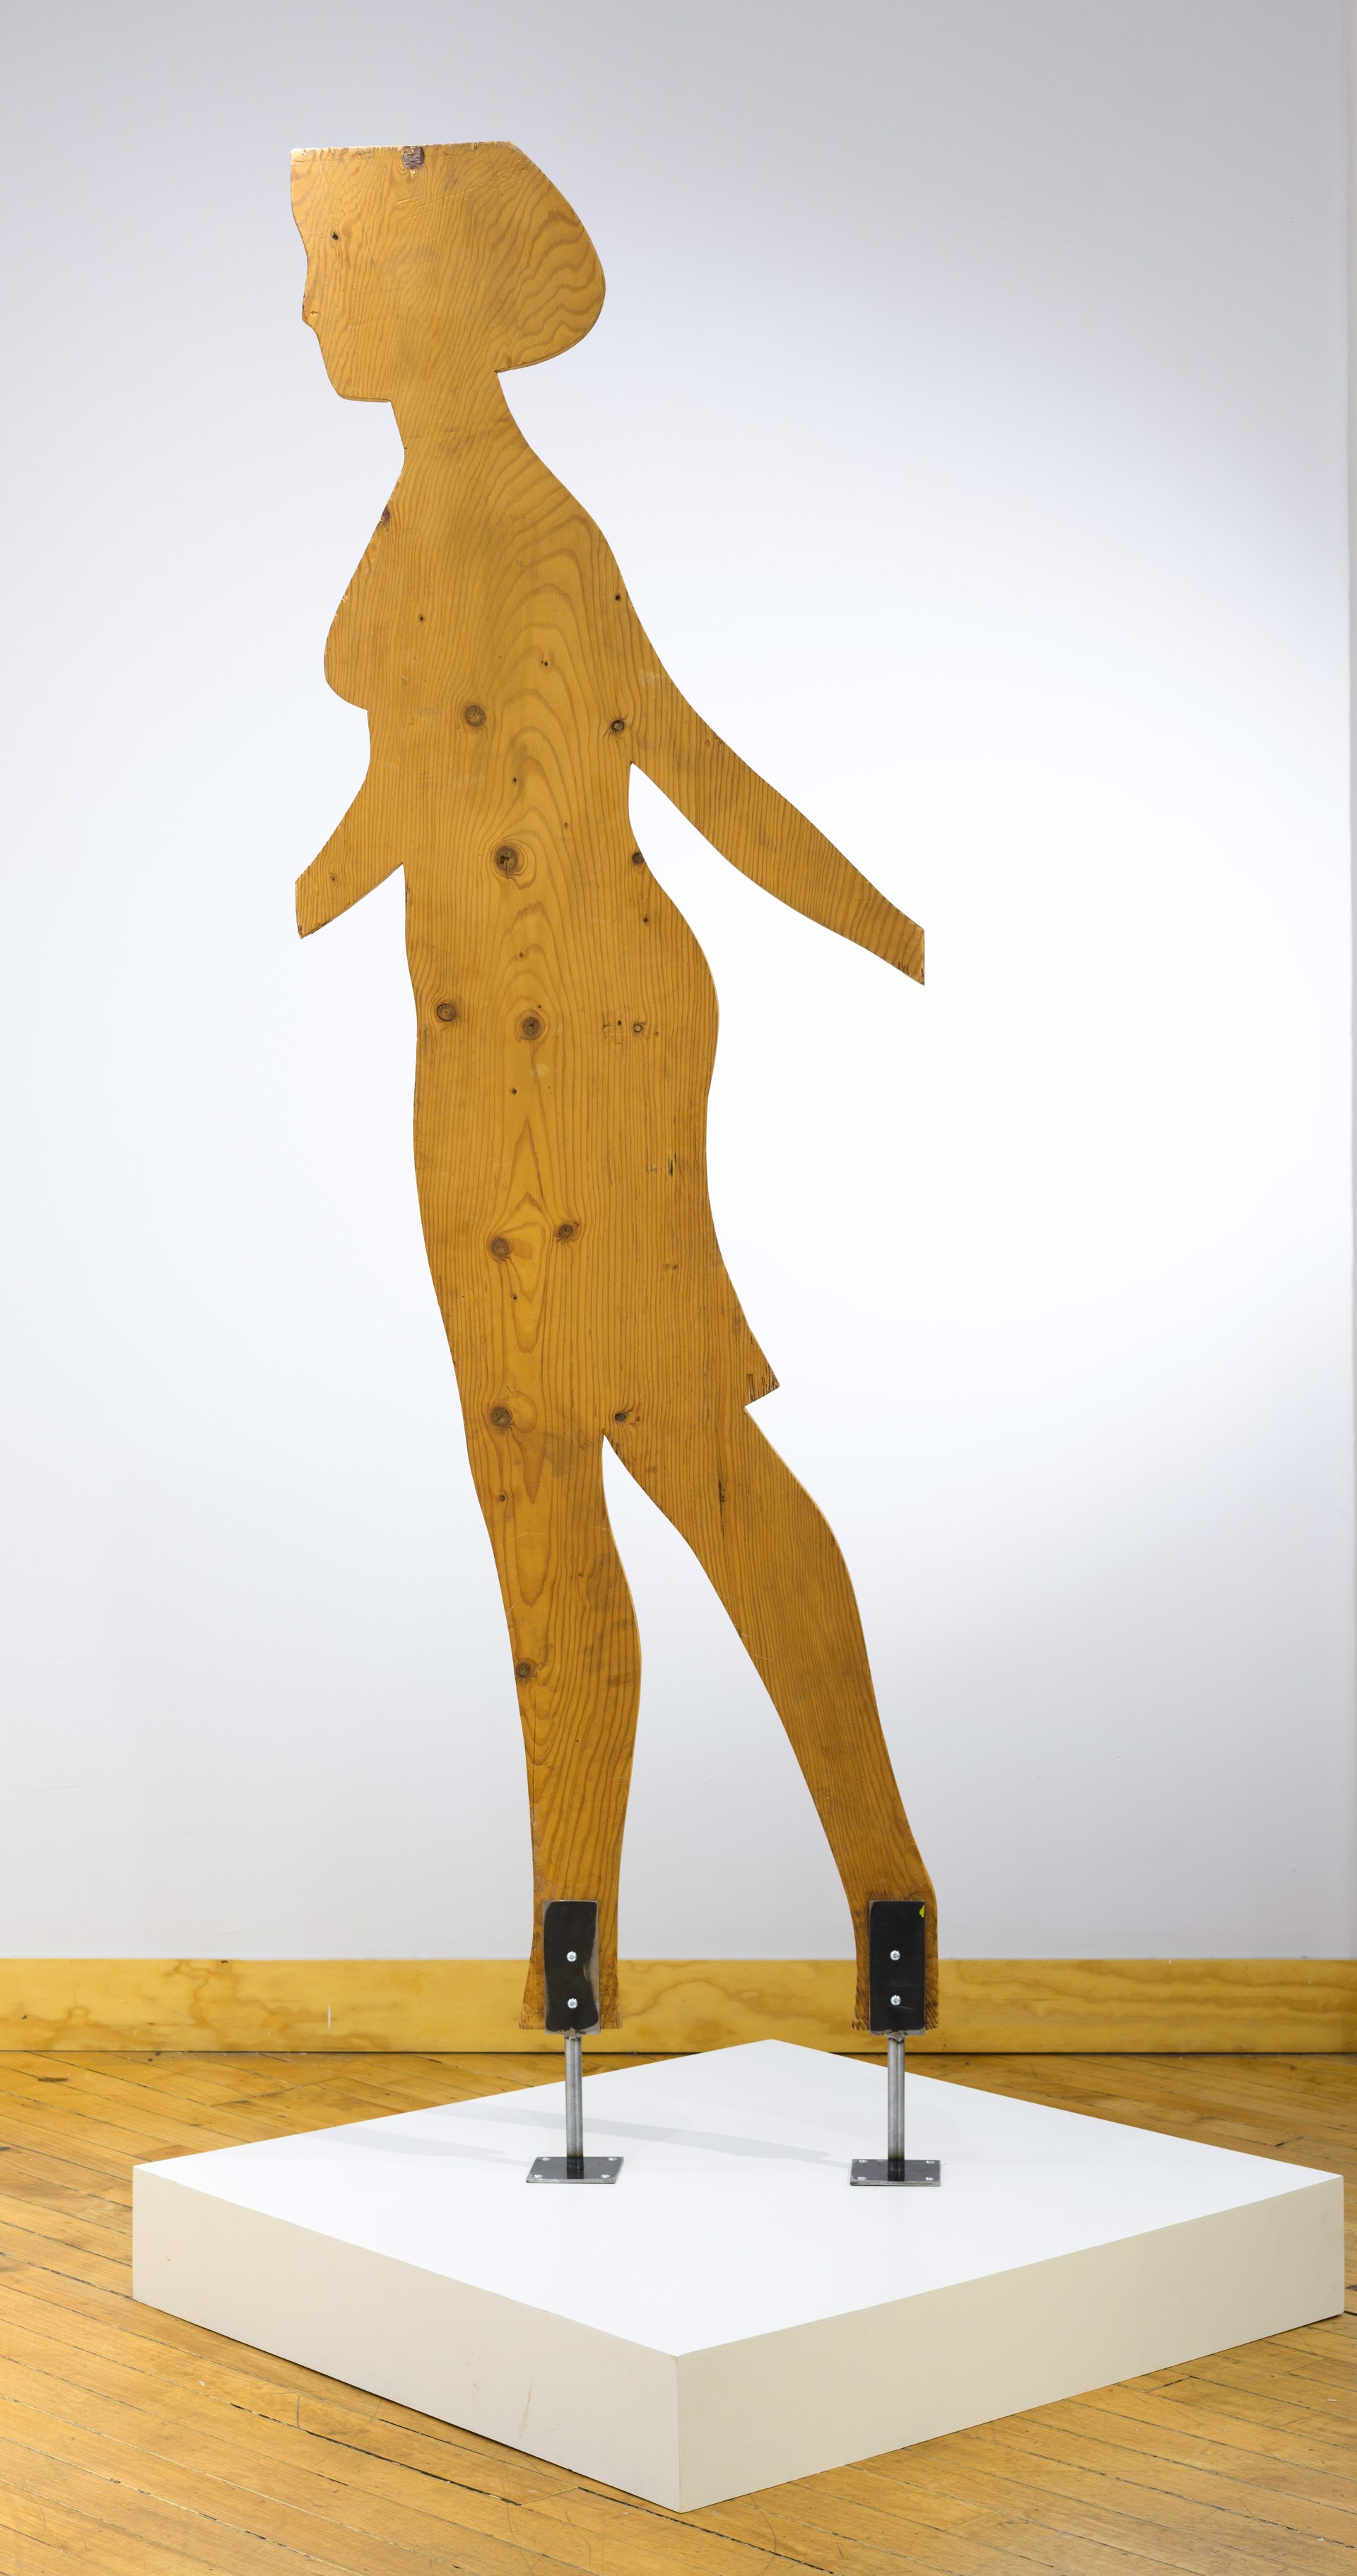 Untitled [Walking Woman] by Michael Snow